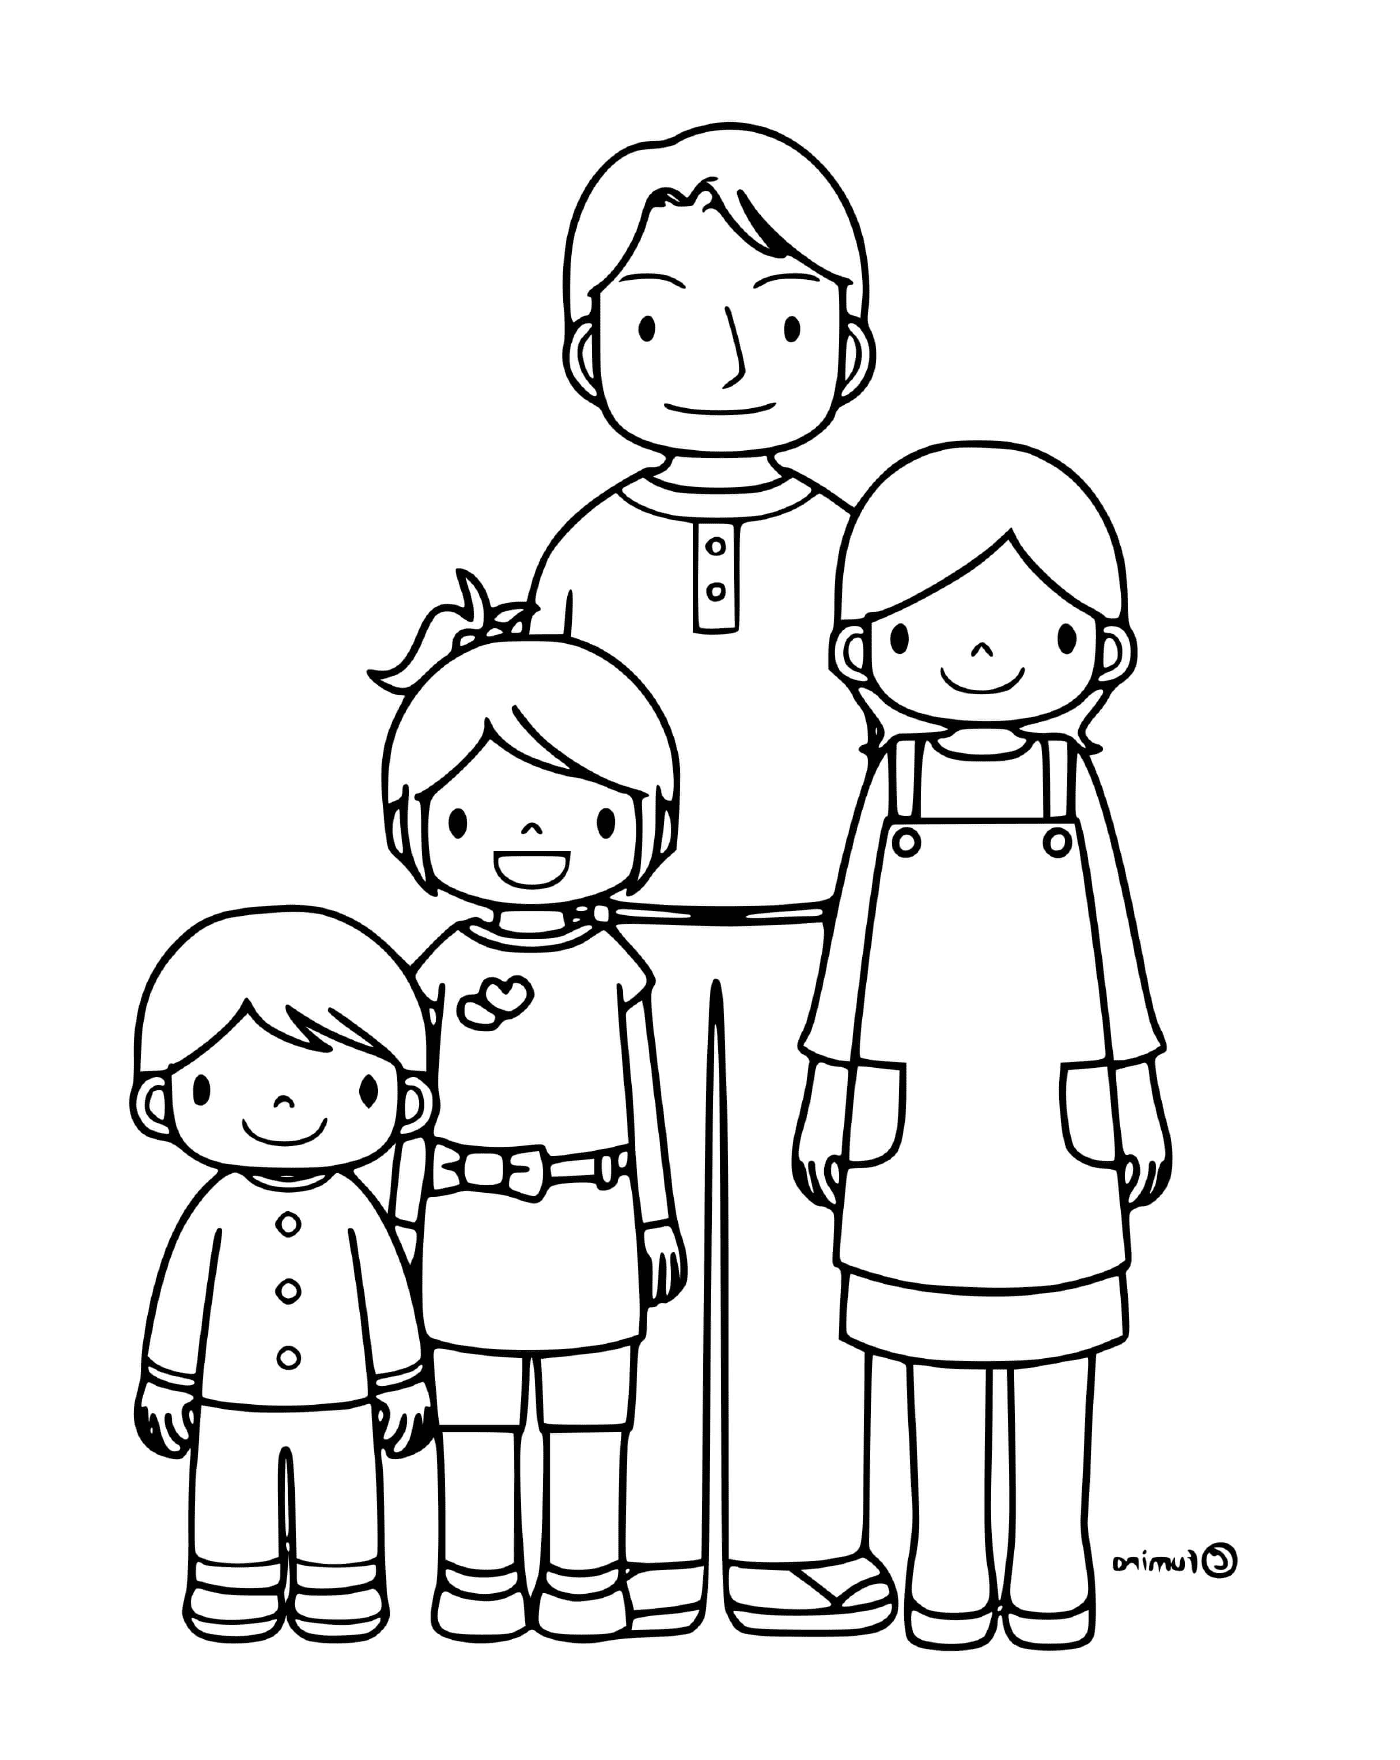  A family of four together 